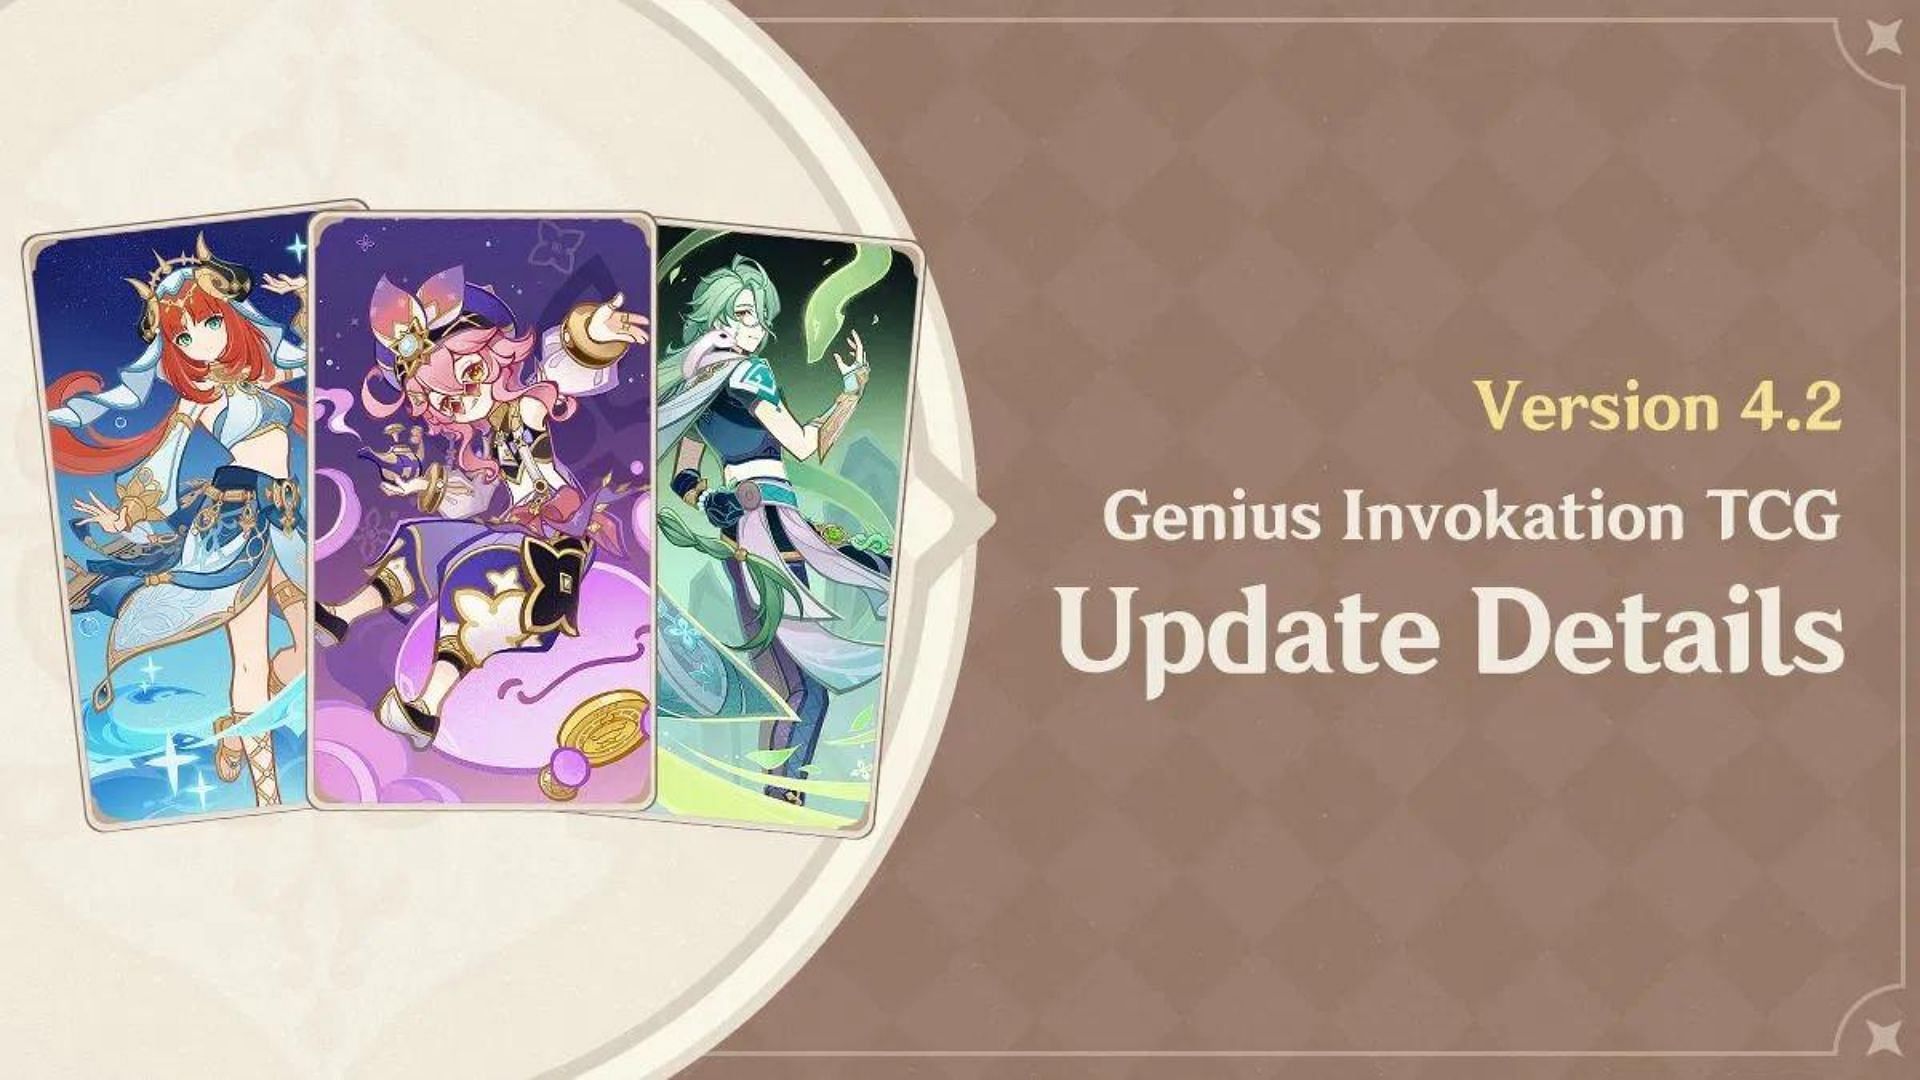 Genshin Impact Version 3.3 Revealed, Adds a Trading Card Game and